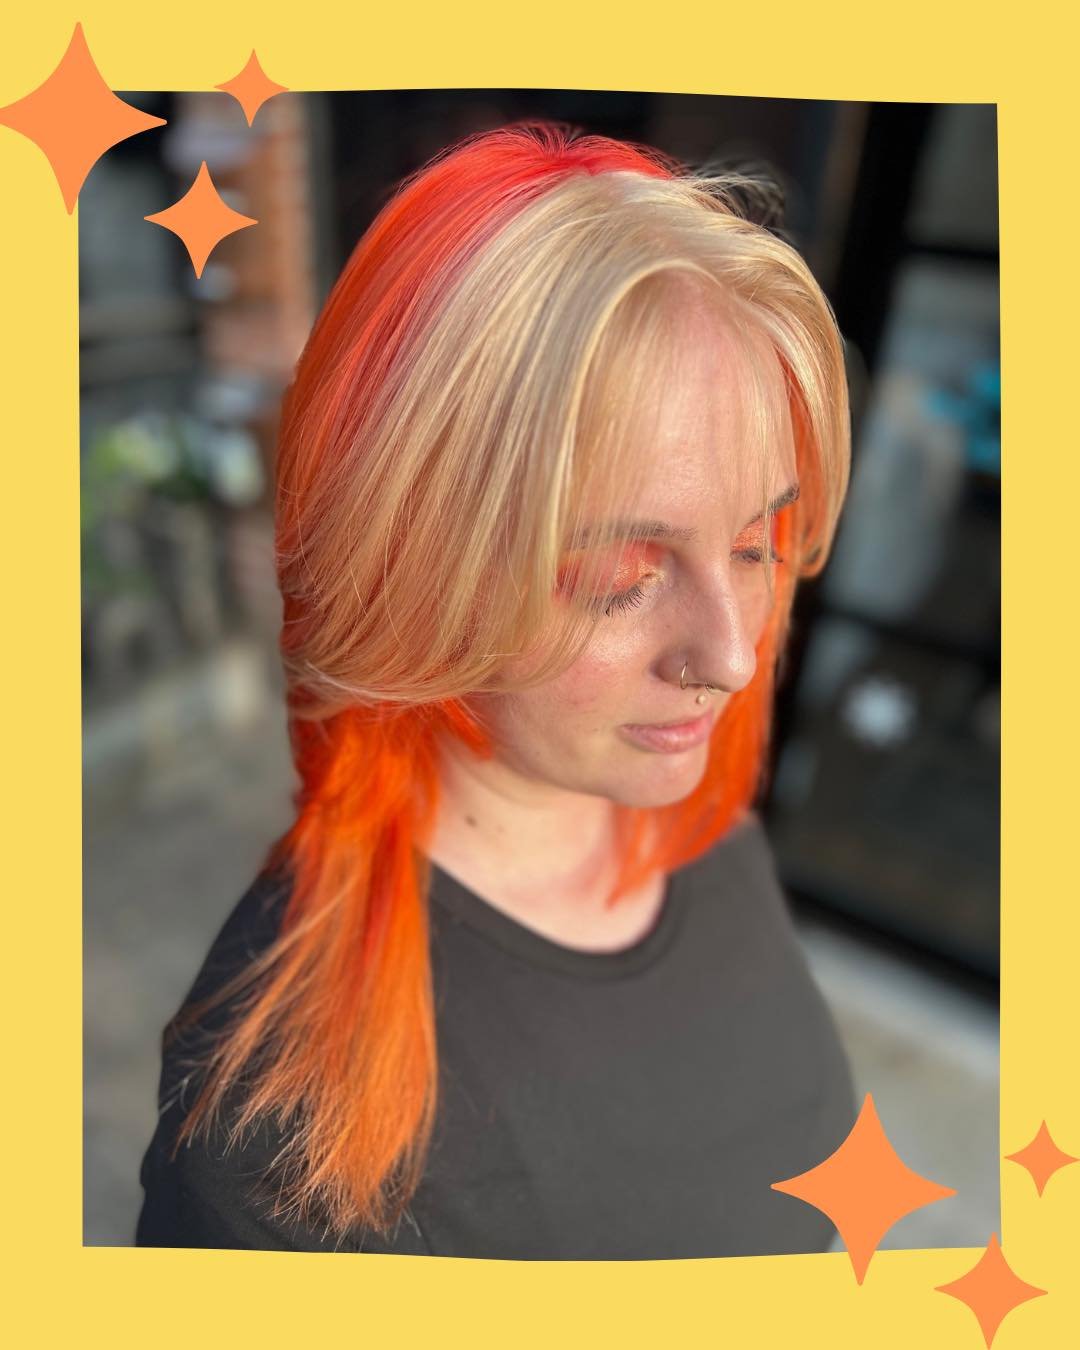 Such an awesome creation by @lauren_unreal1986!!🤩🧡 This orange and blonde color blocking is such a fun look!🔥✨
&bull;
&bull;
&bull;
#avedahaircut #avedahairsalon #avedahairproducts #avedahair #avedavegancolor #avedastylist #hairtransformationspeci